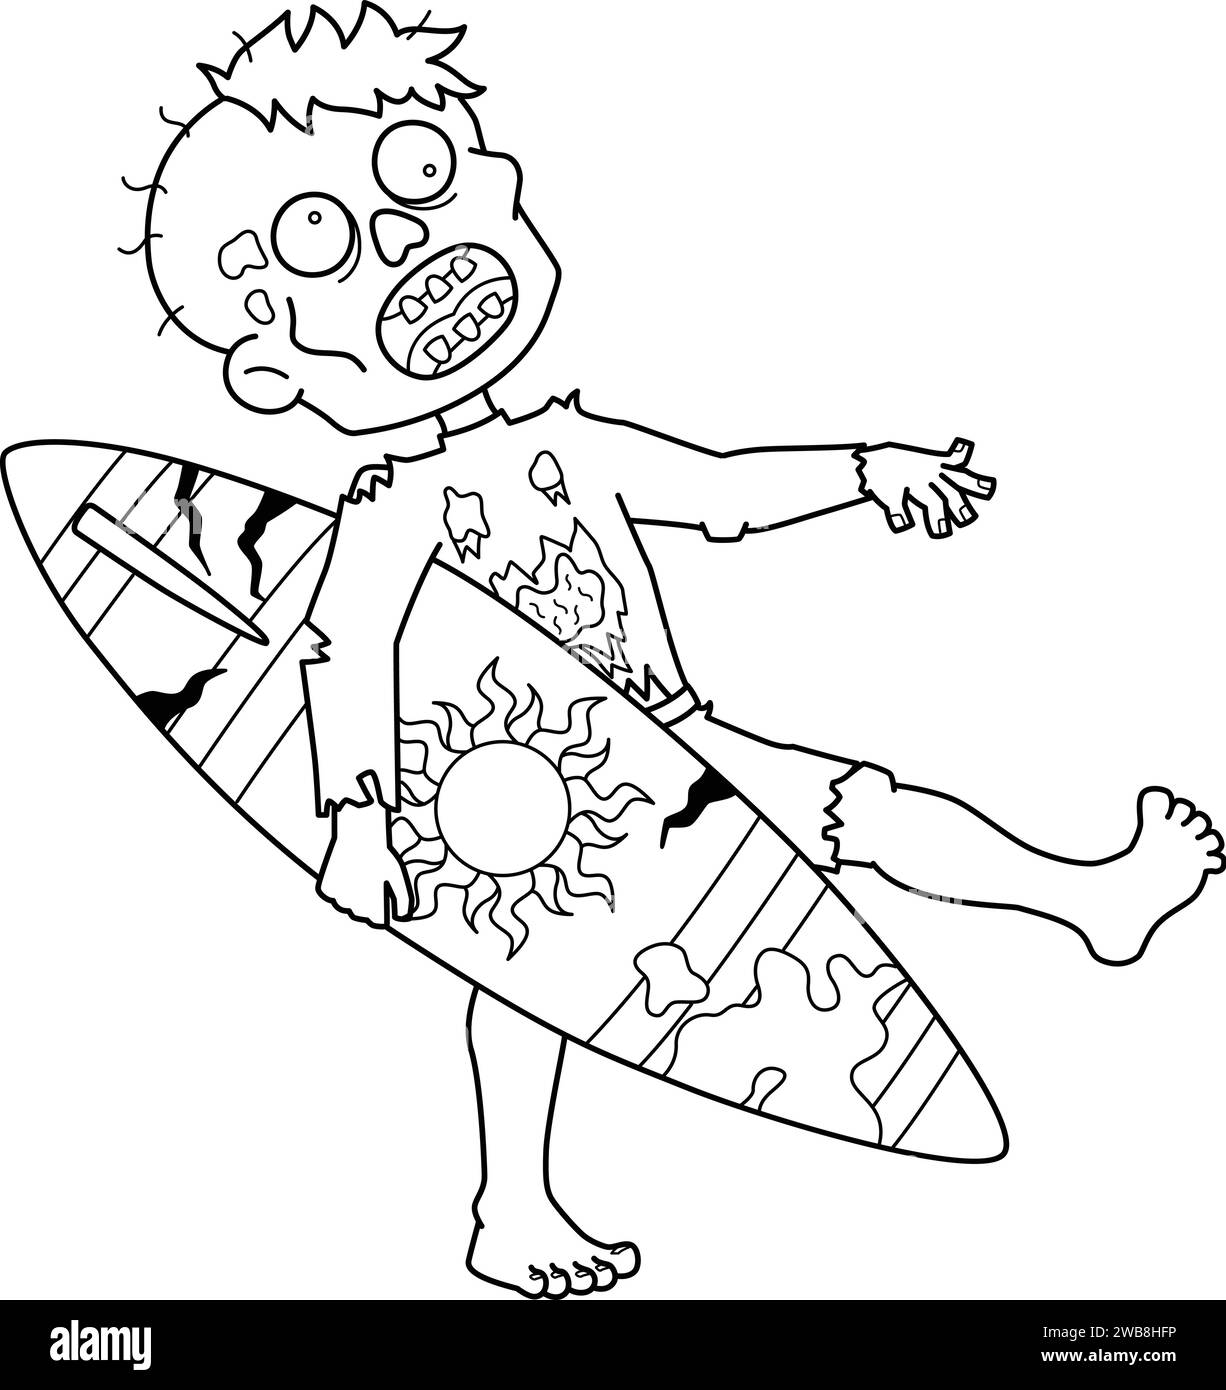 Zombie Surfer Isolated Coloring Page for Kids Stock Vector